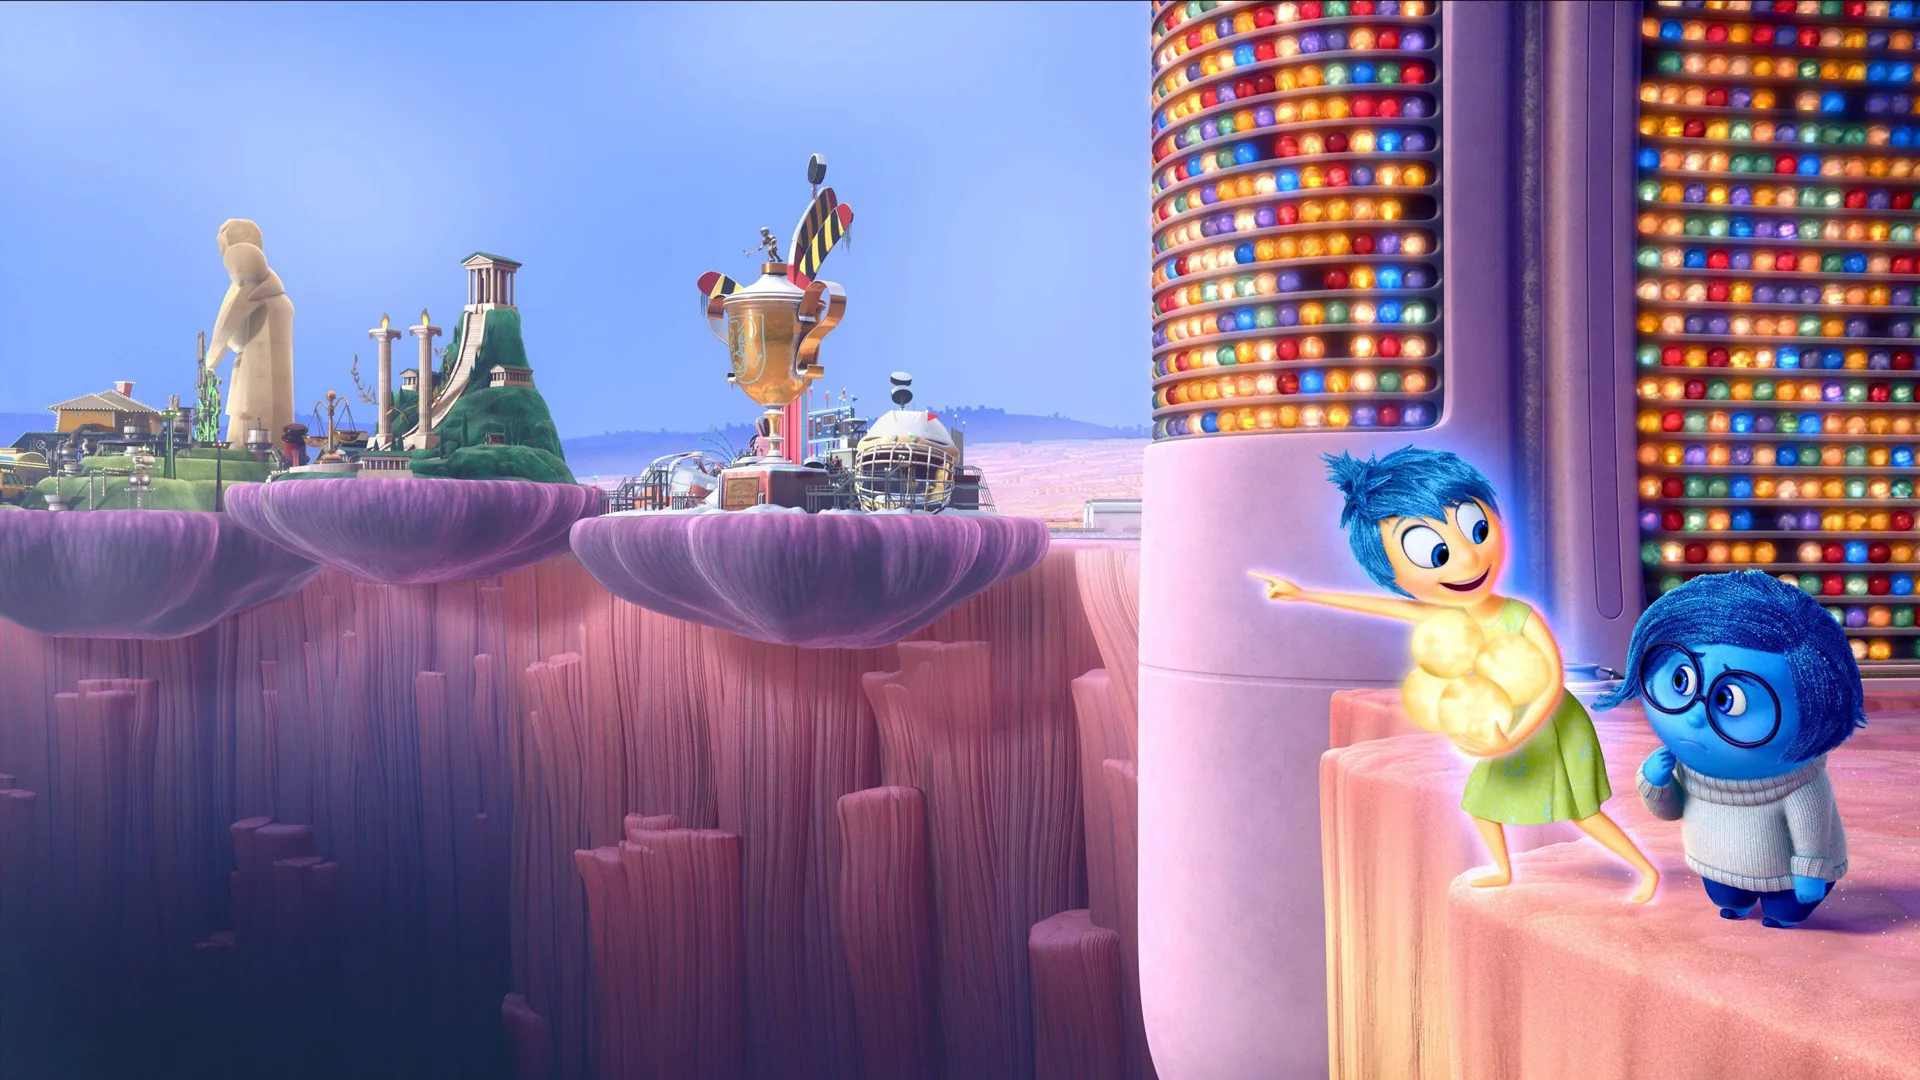 A scene from the Disney/Pixar film Inside Out showing Joy pointing out to the core memories with Sadness